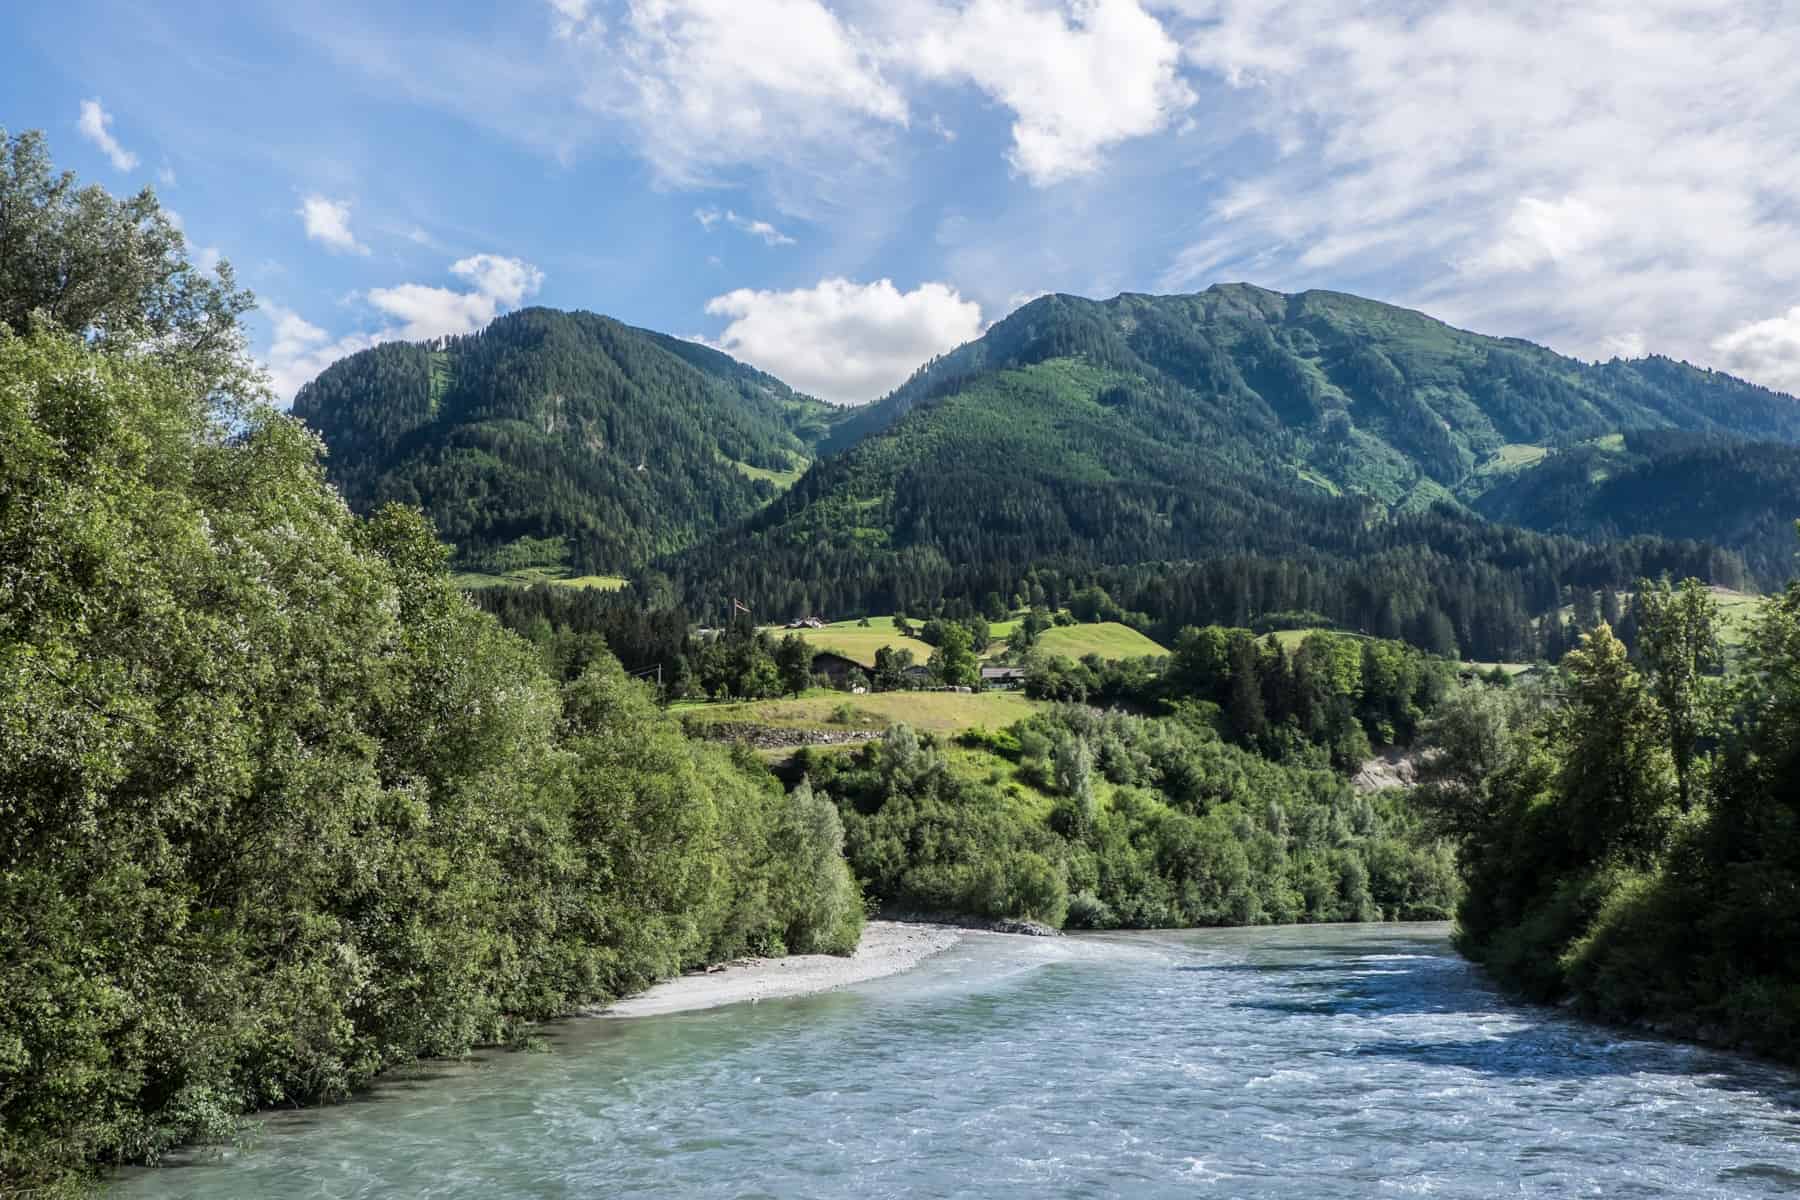 Crystal clear blue water flows towards a green meadow backed by grass coloured mountains in St. Johann im Pongau, Austria